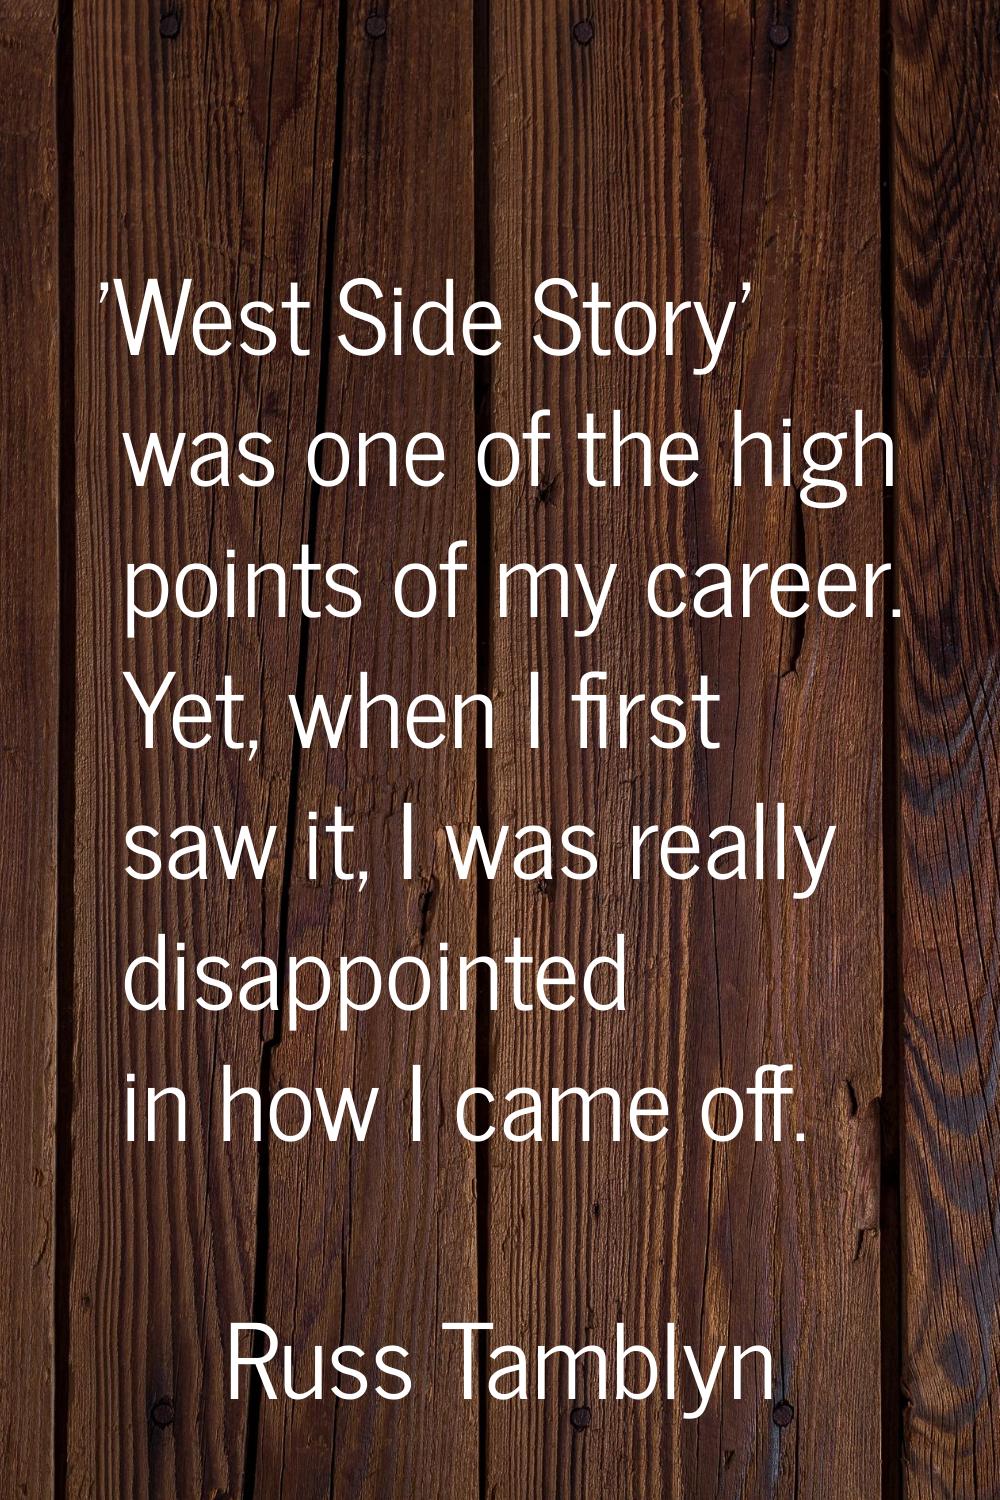 'West Side Story' was one of the high points of my career. Yet, when I first saw it, I was really d